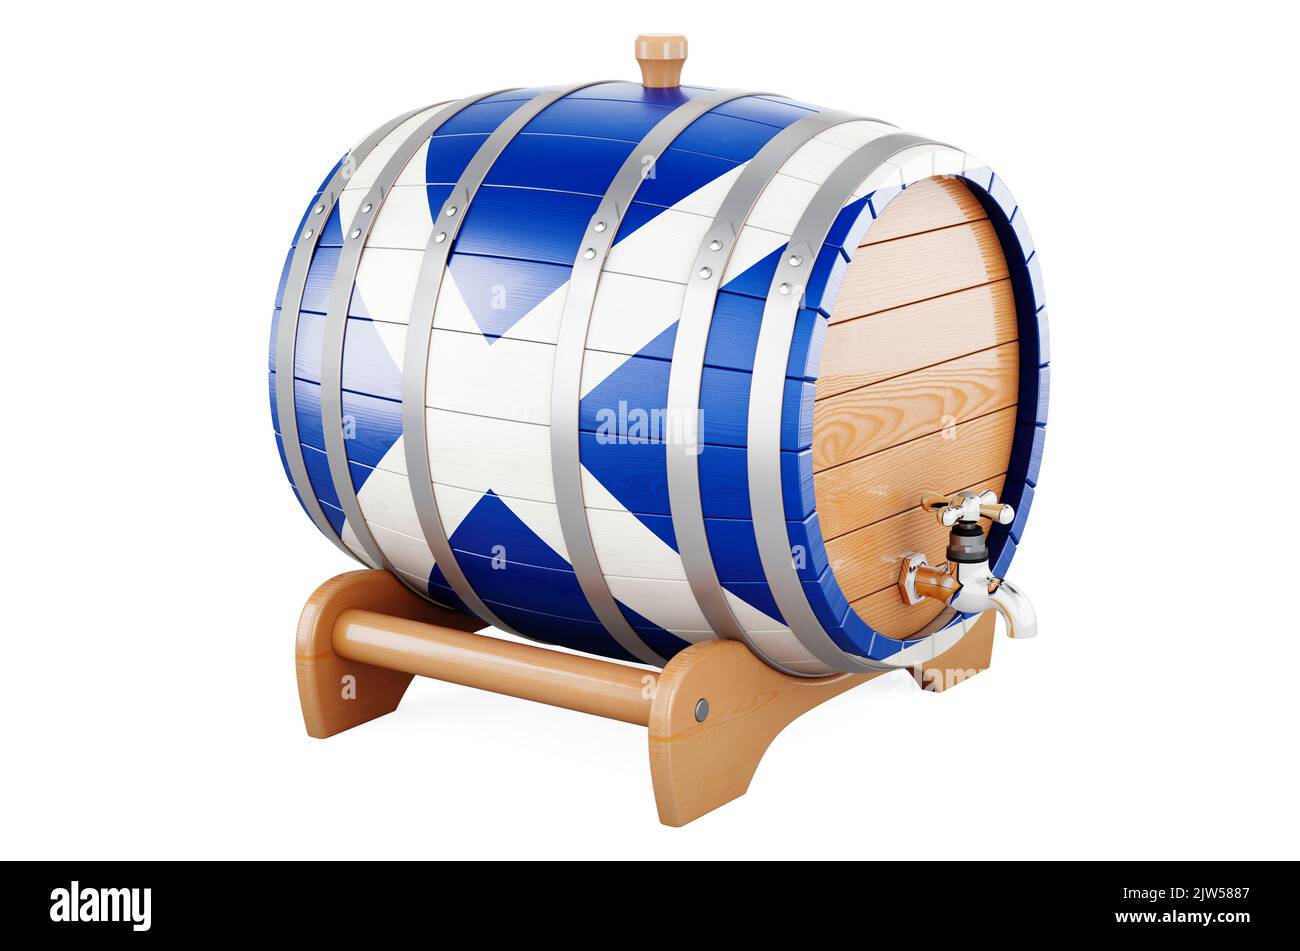 Wooden barrel with Scottish flag, 3D rendering isolated on white background Stock Photo